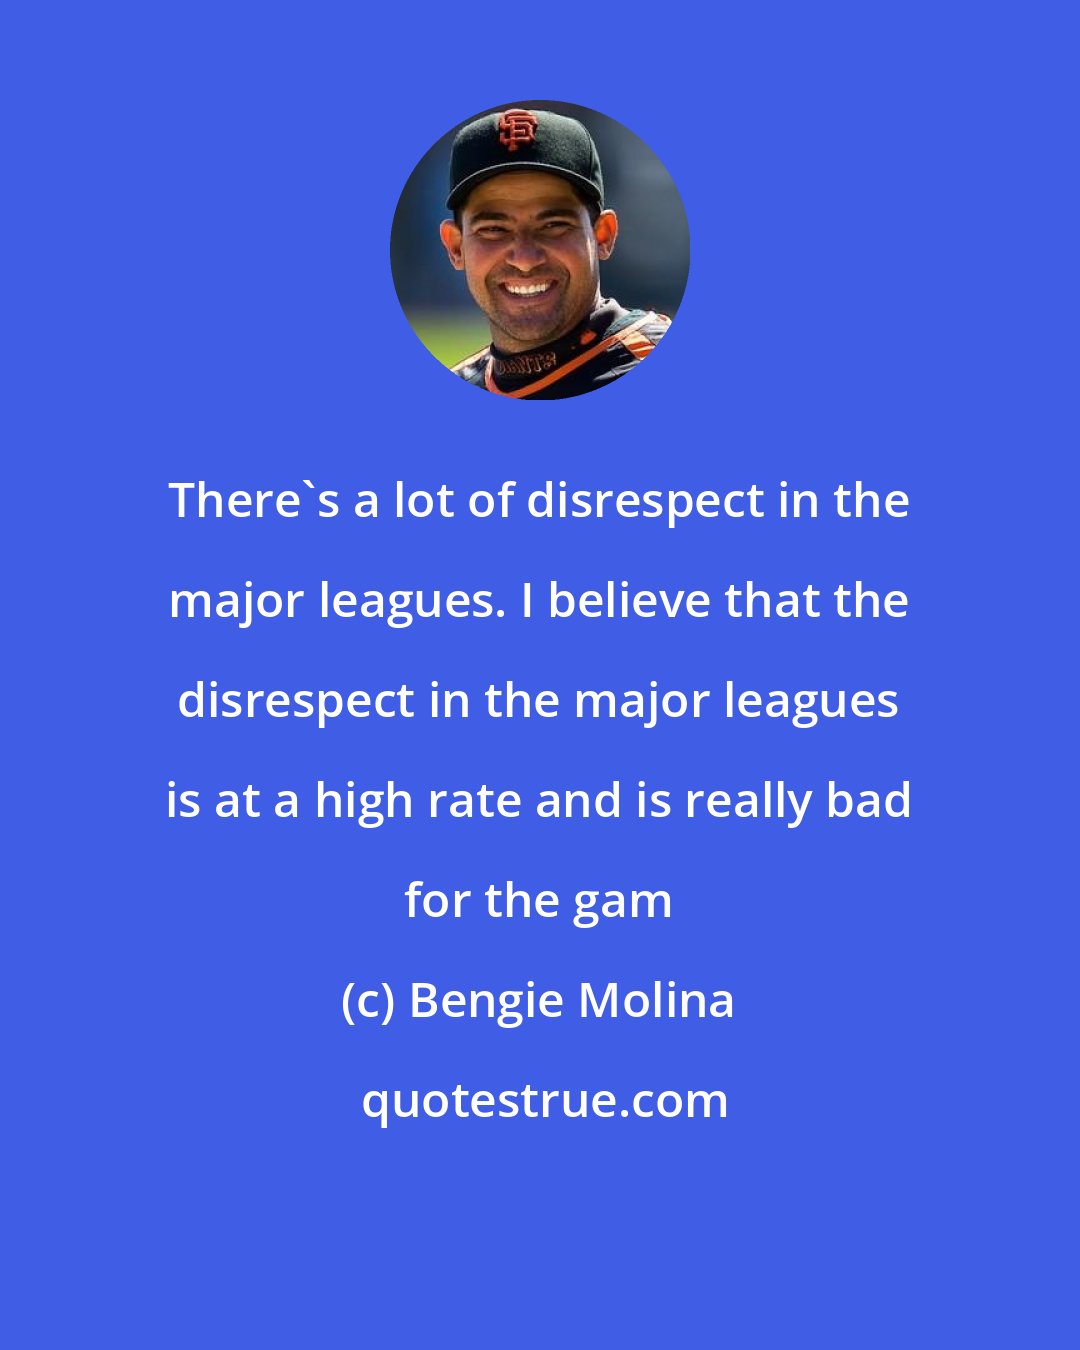 Bengie Molina: There's a lot of disrespect in the major leagues. I believe that the disrespect in the major leagues is at a high rate and is really bad for the gam